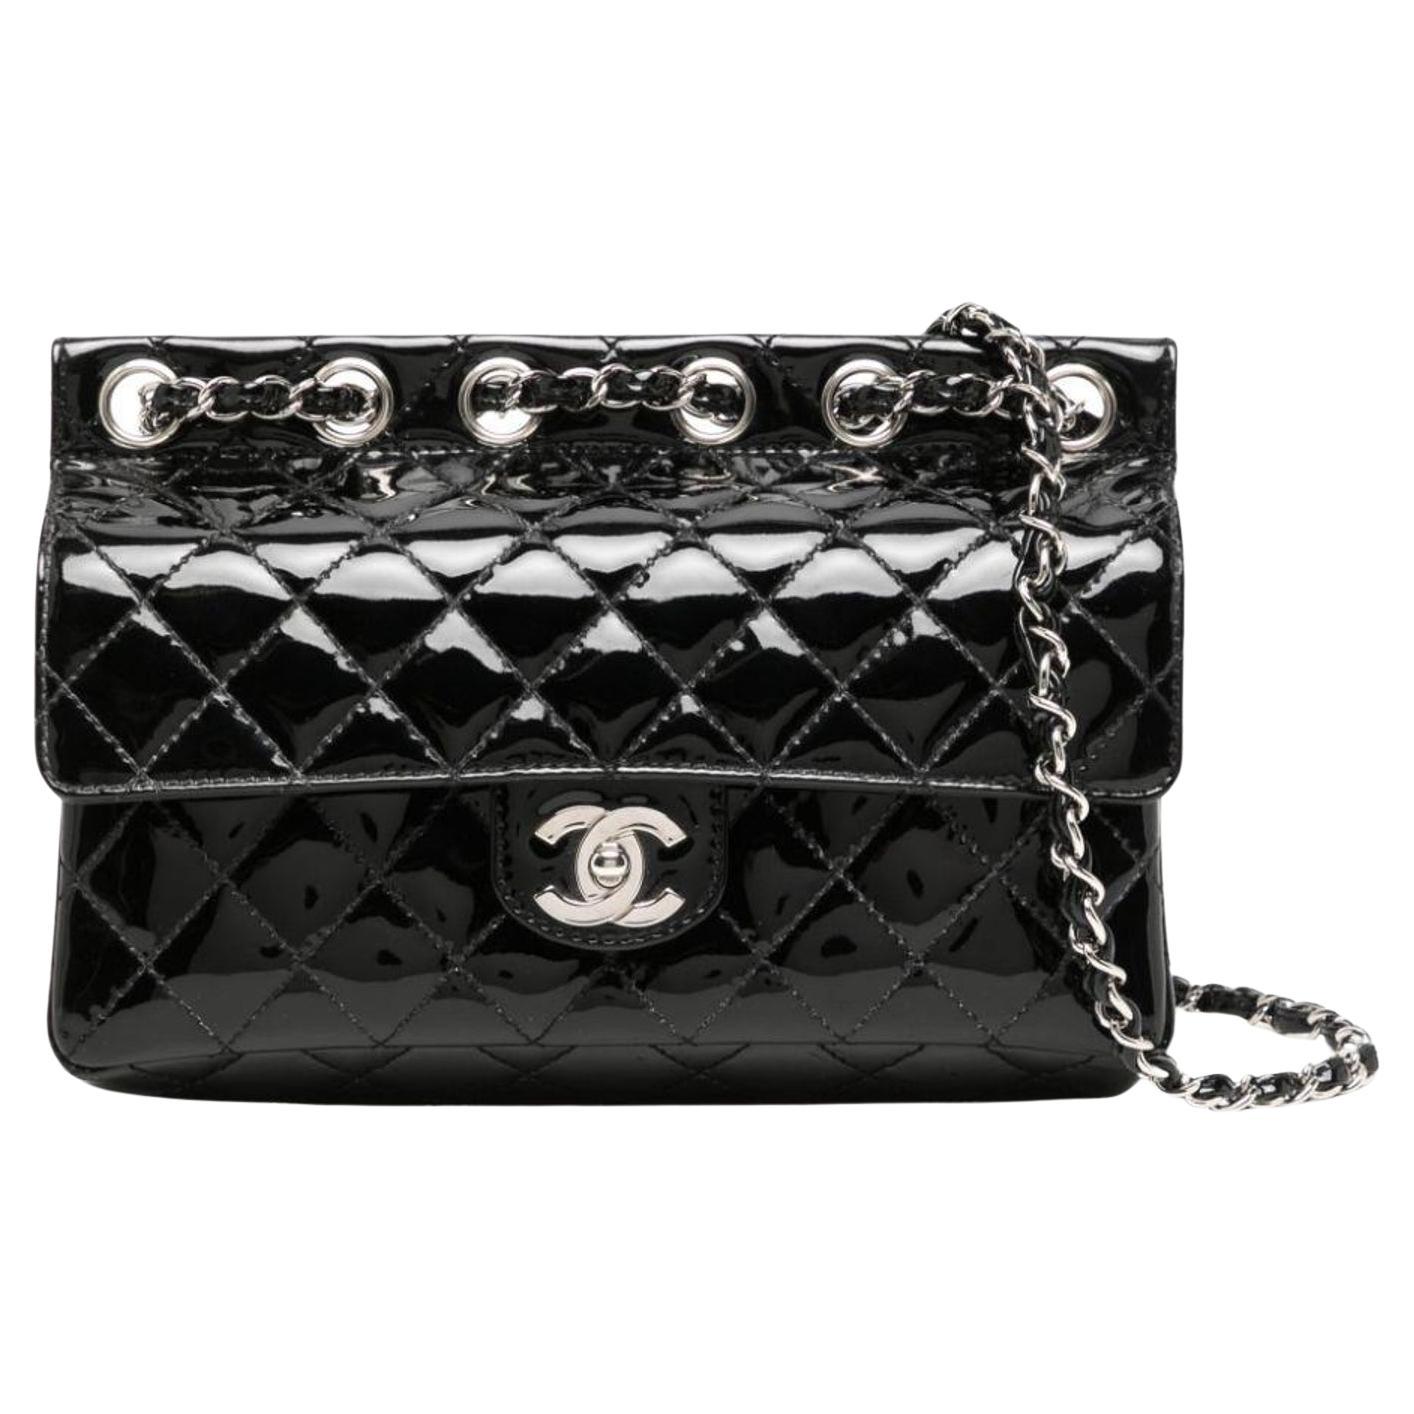 Chanel Classic Flap Supermodel Super Rare Quilted Black Patent Leather Bag For Sale